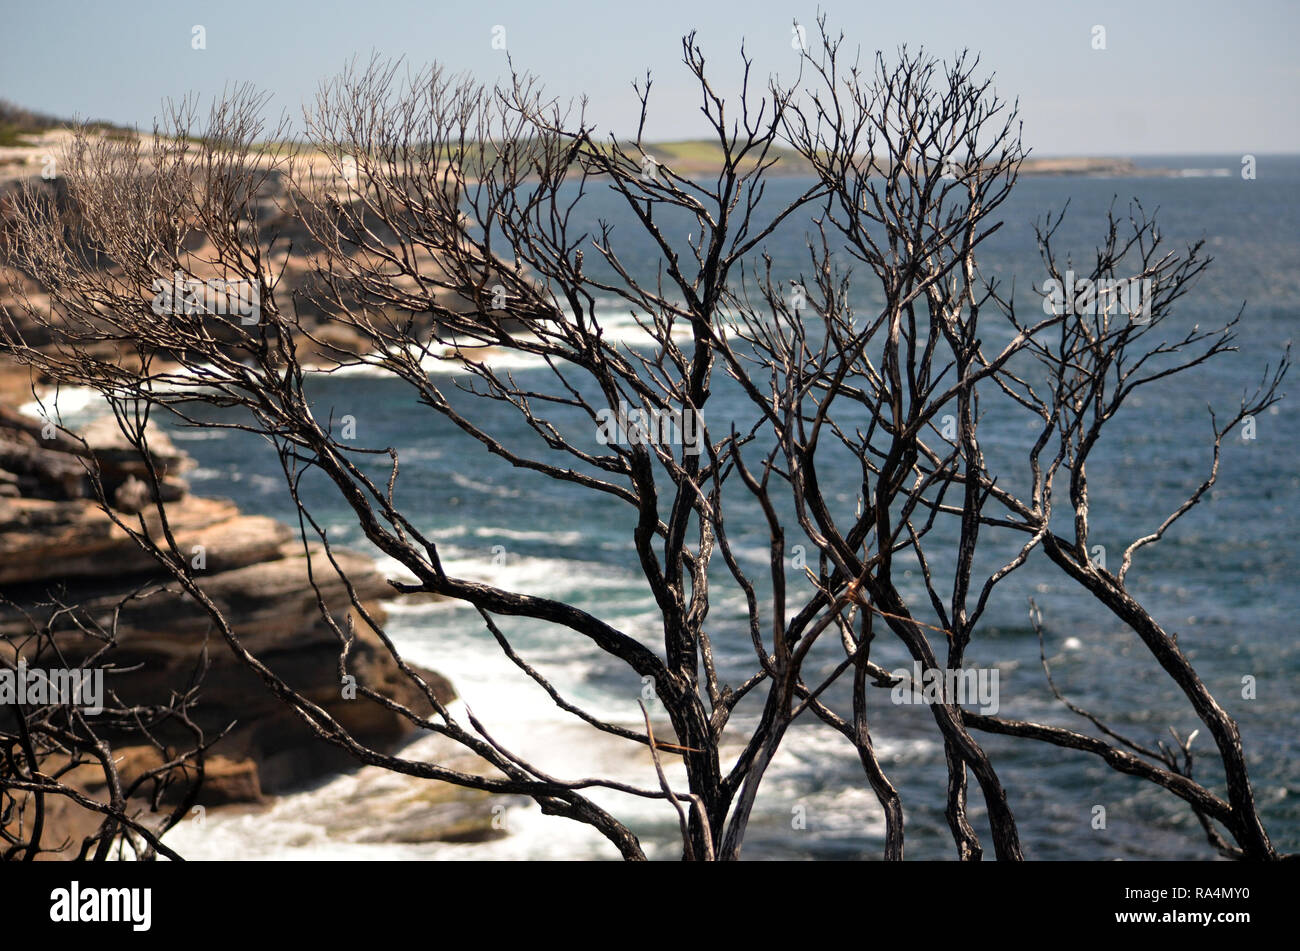 Burnt and blackened trees on coastal sandstone plateau at Cape Solander after a bushfire in Sydney, NSW, Australia. Stock Photo